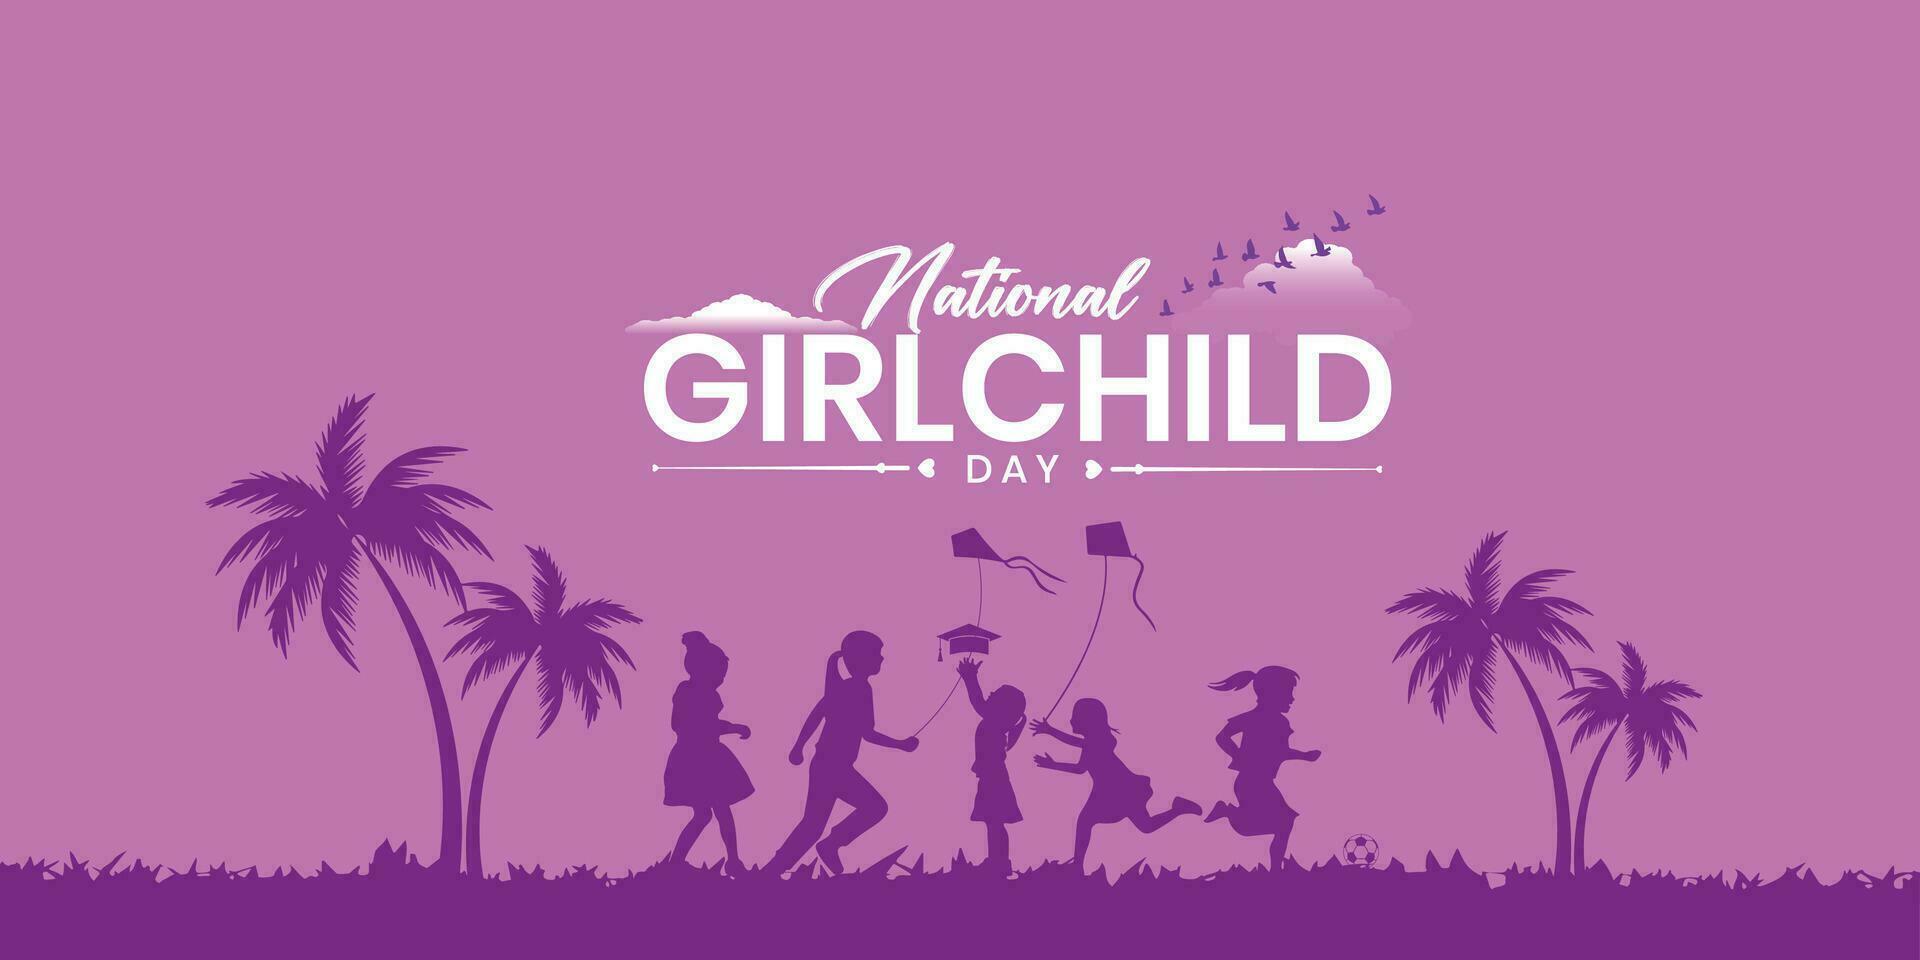 International Day of the Girl Child. 11 October - International Day of the Girl Child. International Children's Day Greeting Card. Editable vector illustration daughter, girl.